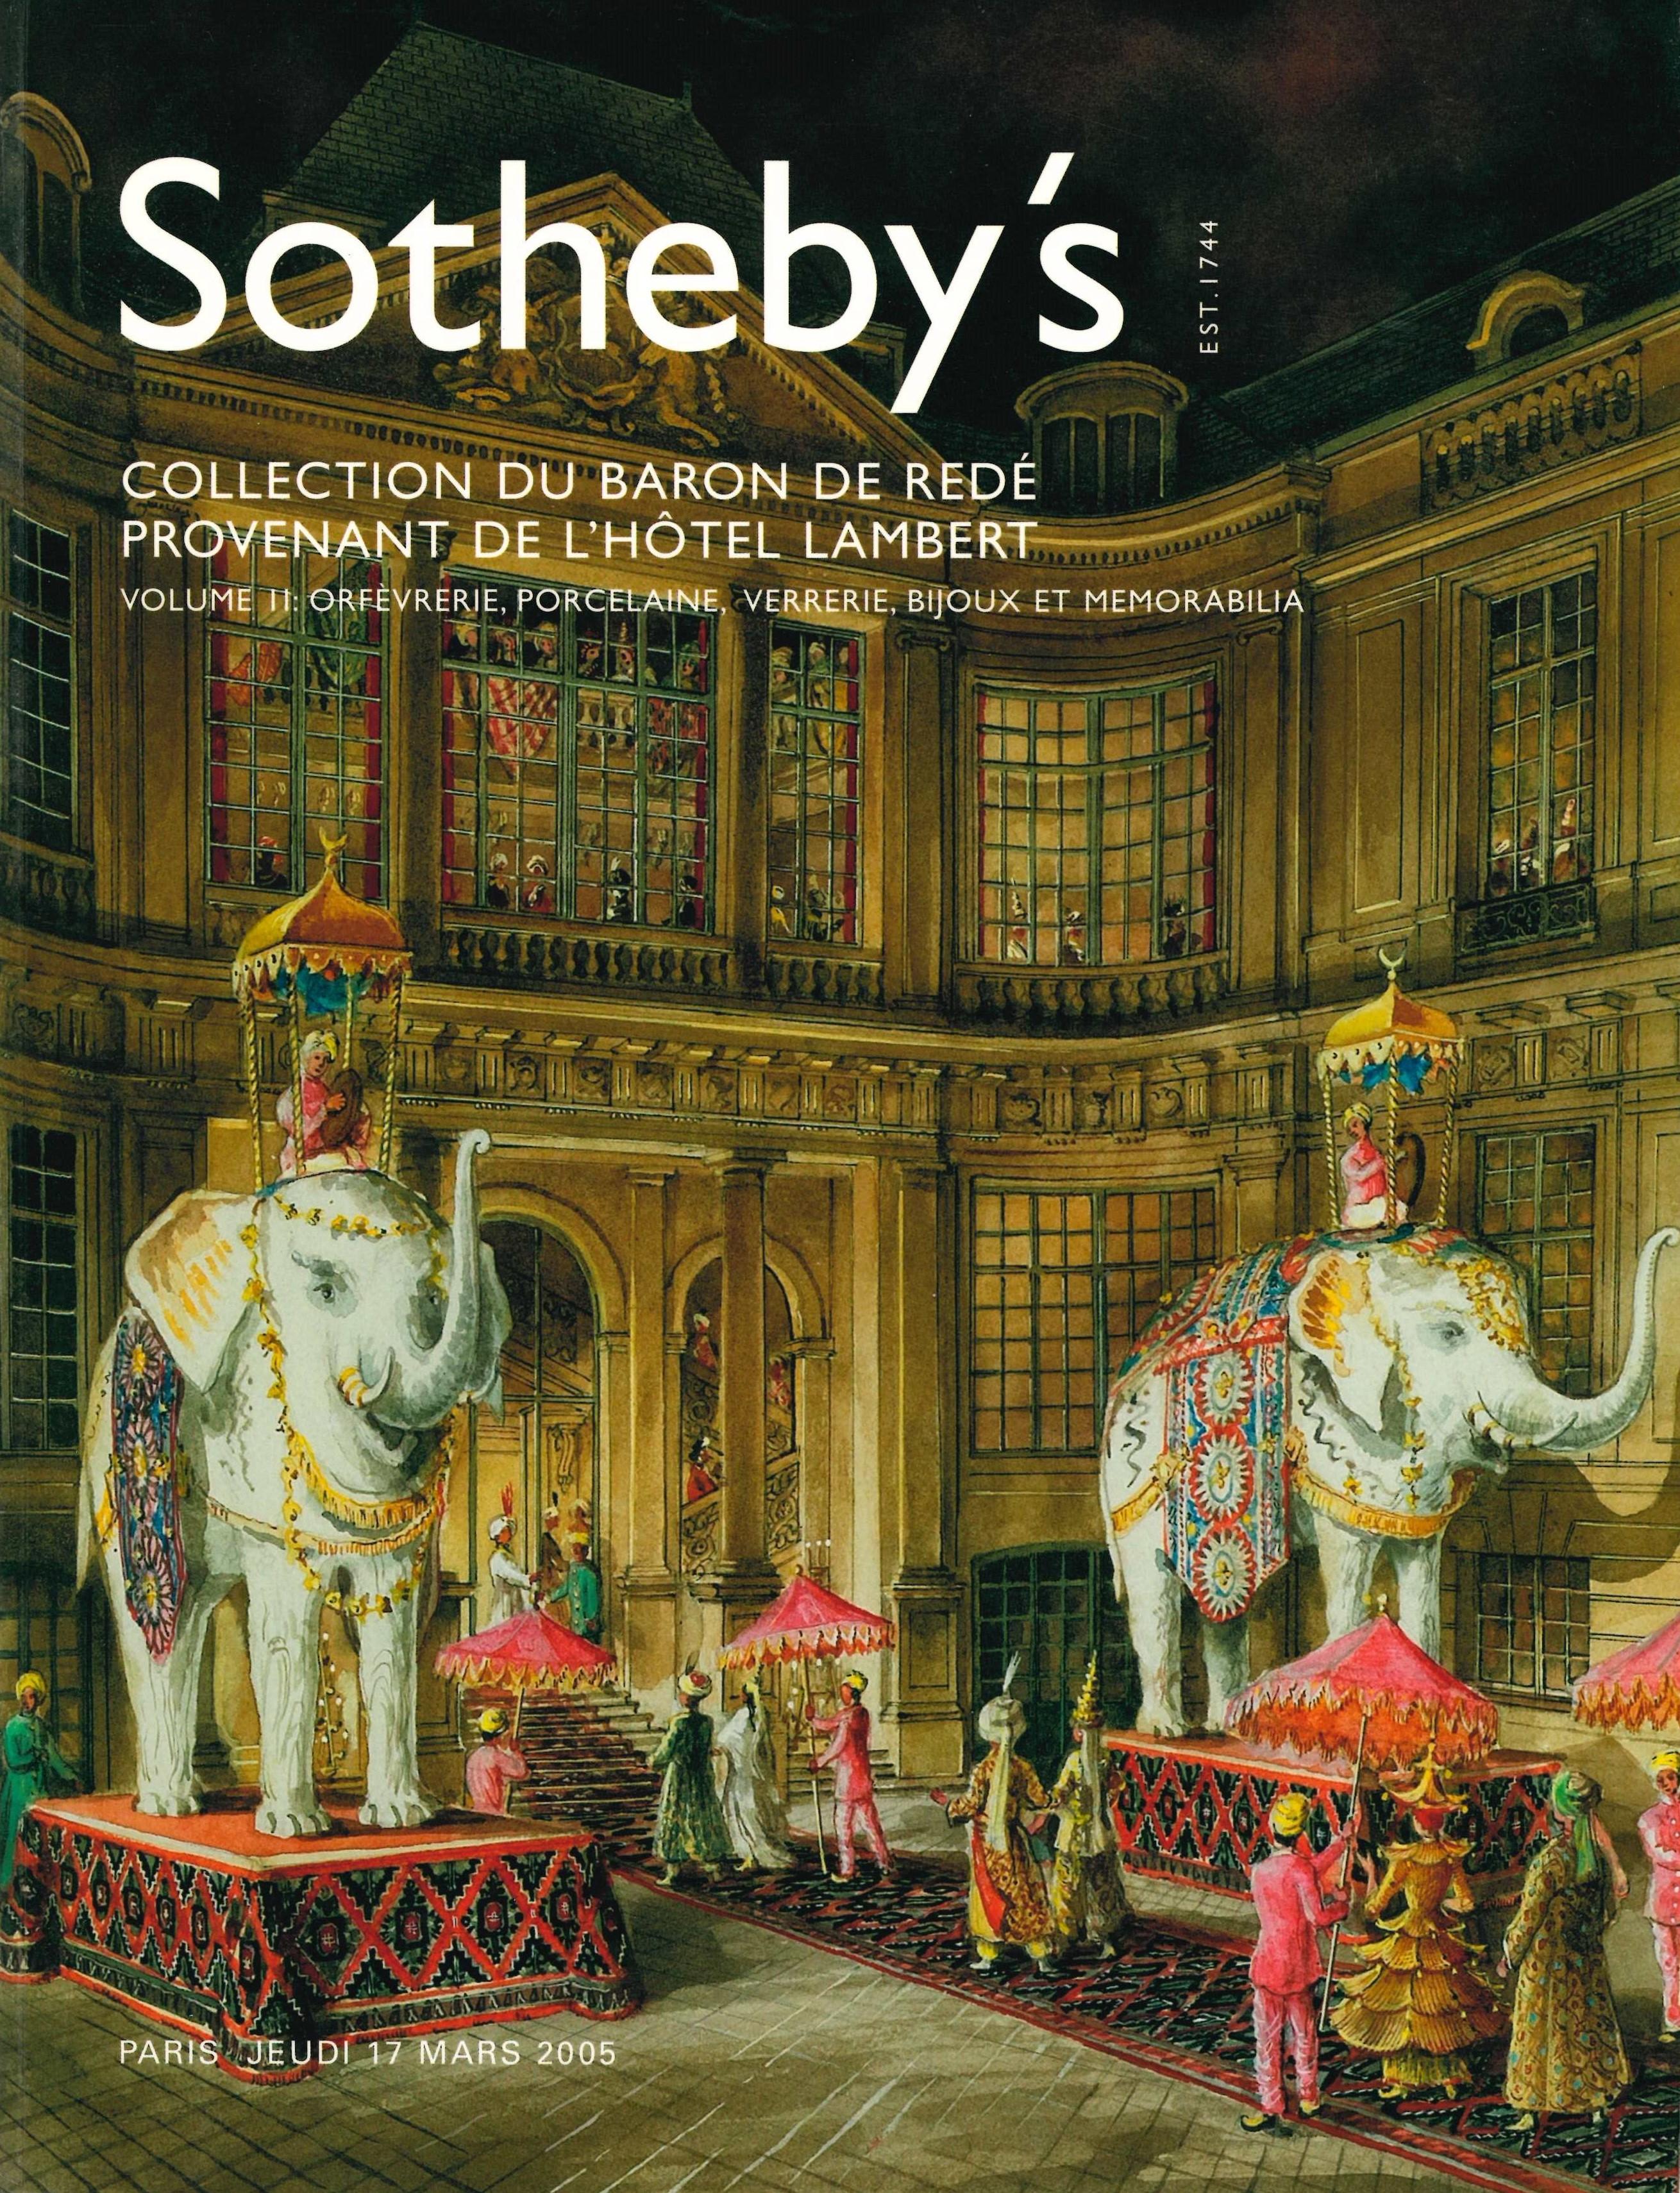 Paris. Sotheby's. 16 & 17 Mars 2005. 2 volumes. Paperback, housed in card wrap-around box. 295, 303 pages. 908 lots, nearly all illustrated in colour. 300 x 230mm (11¾ x 9